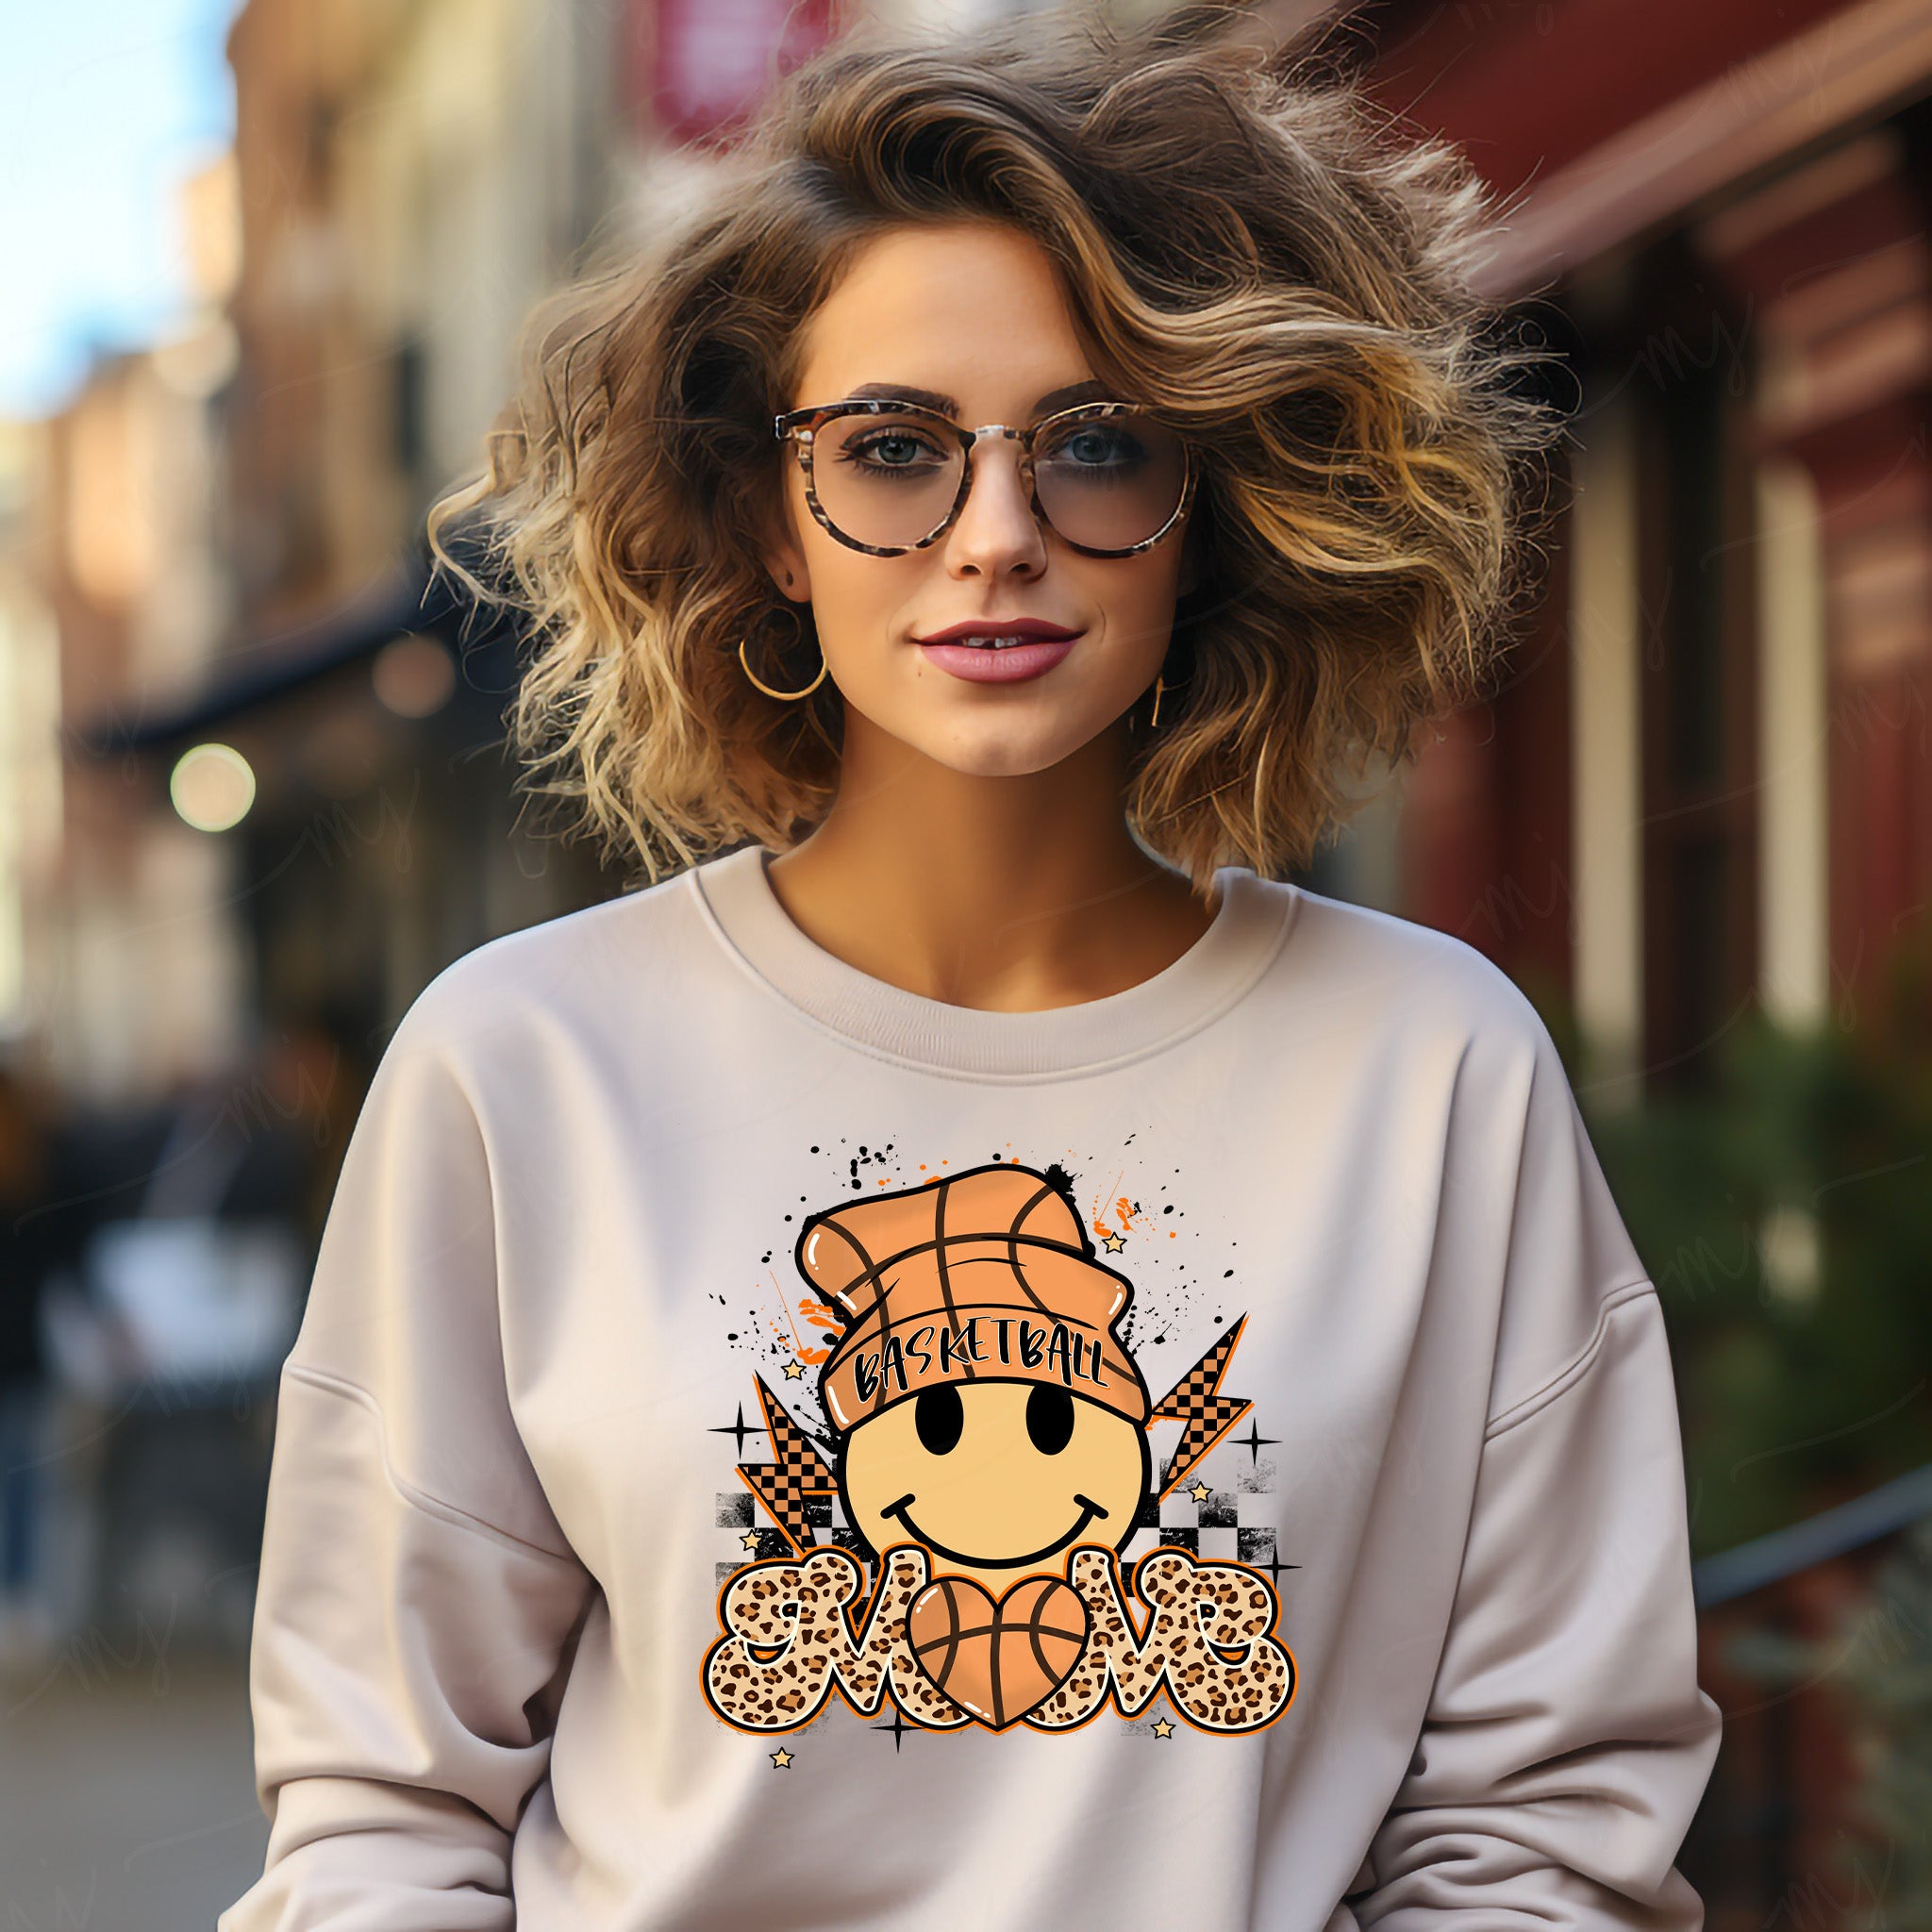 a woman wearing a sweatshirt with a smiley face on it